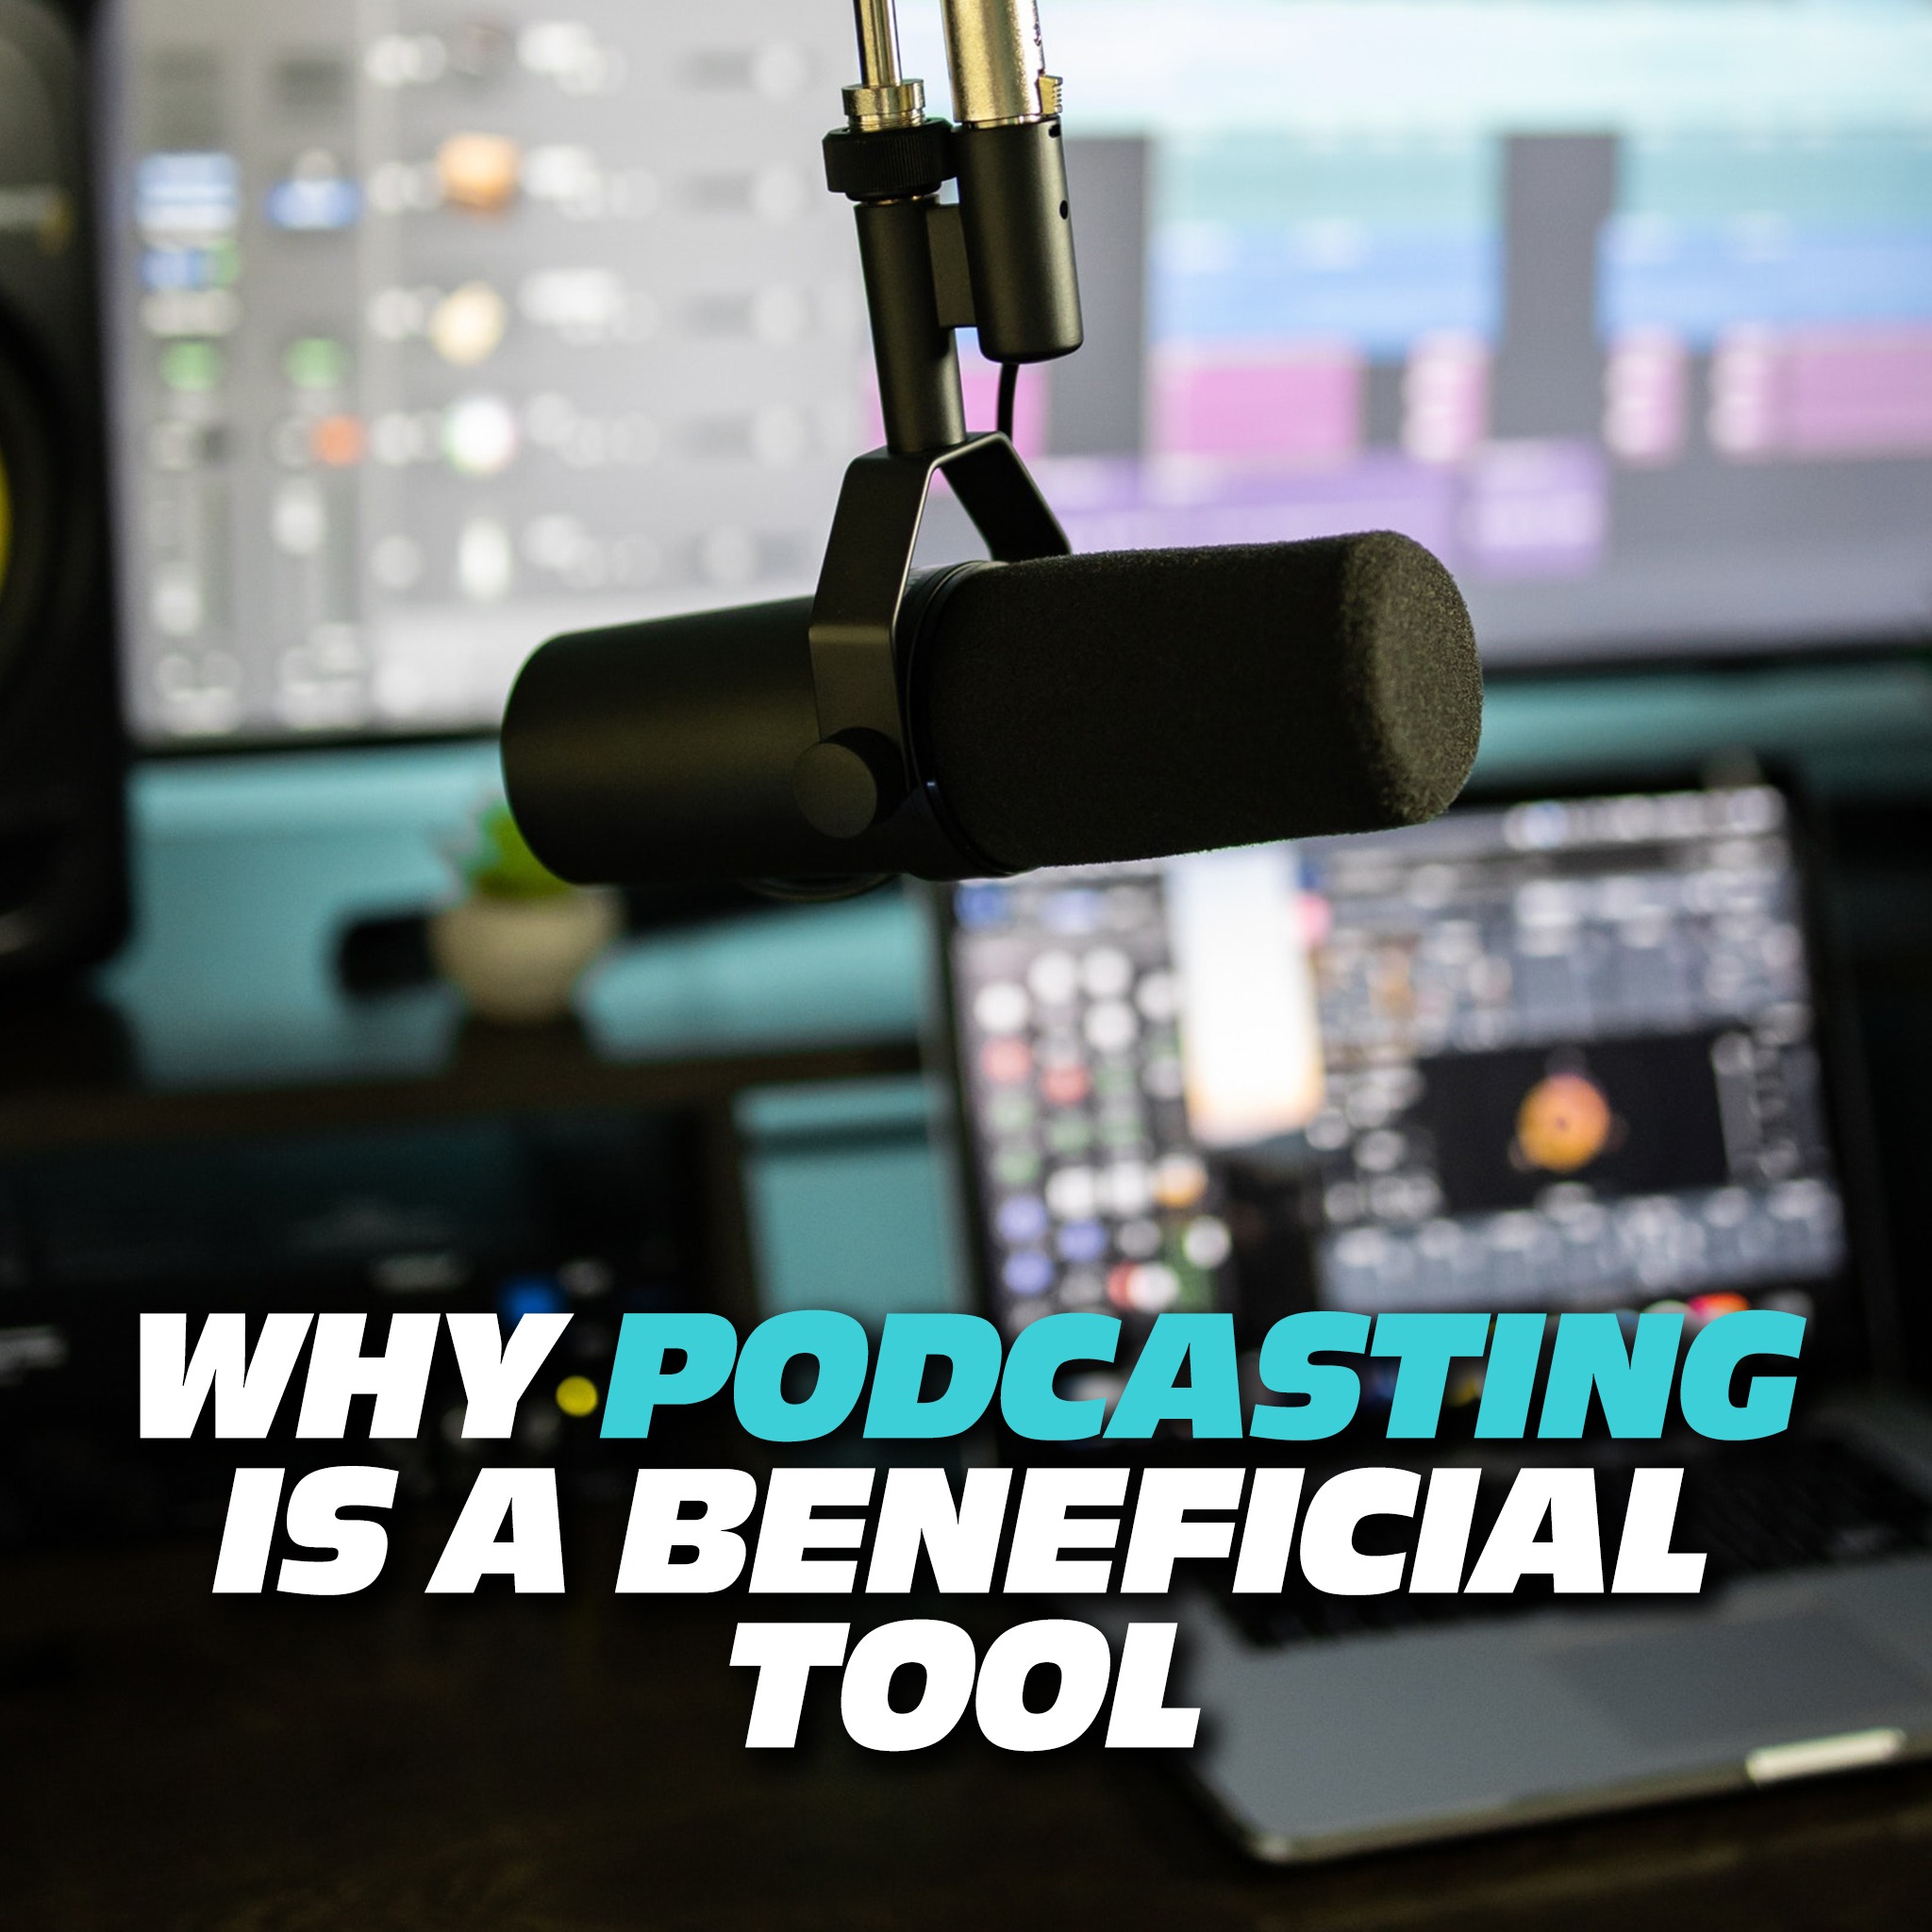 Why Podcasting is a Beneficial Tool